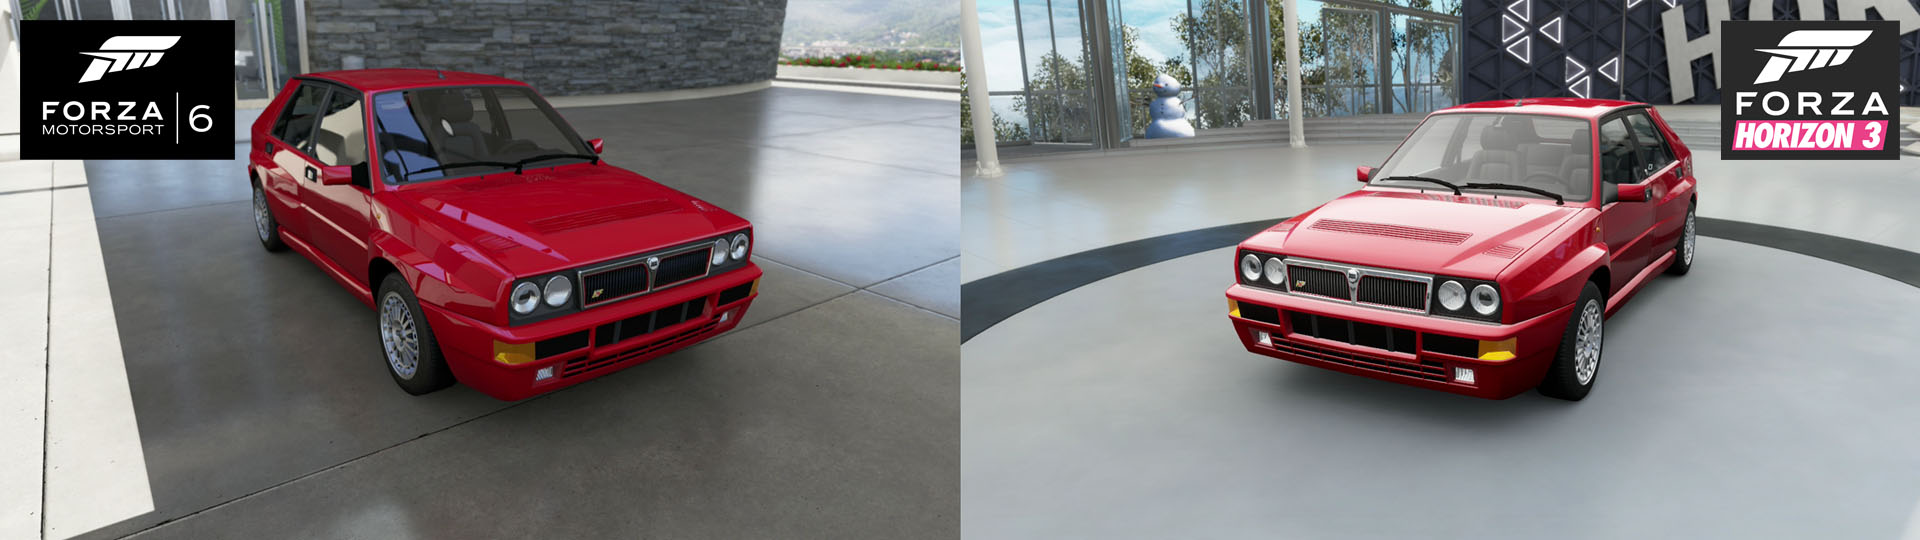 Here is the awesome Lancia Delta Integrale EVO in both Forza Motorsport 6 and Forza Horizon 3.